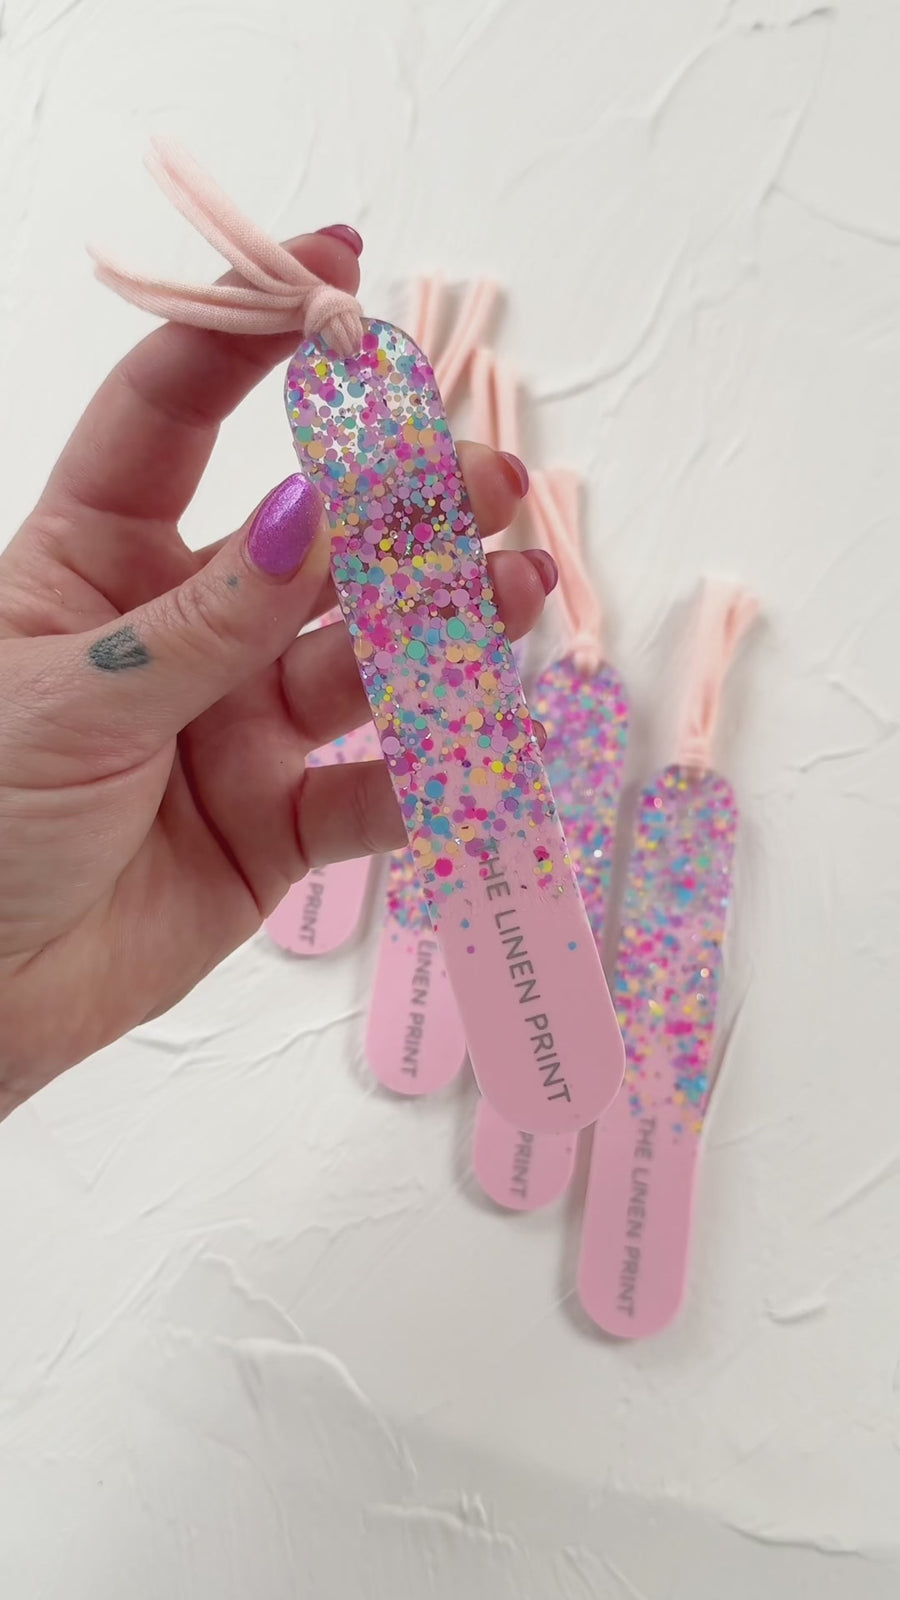 The Bookmark - Mermaid Bright (limited edition)